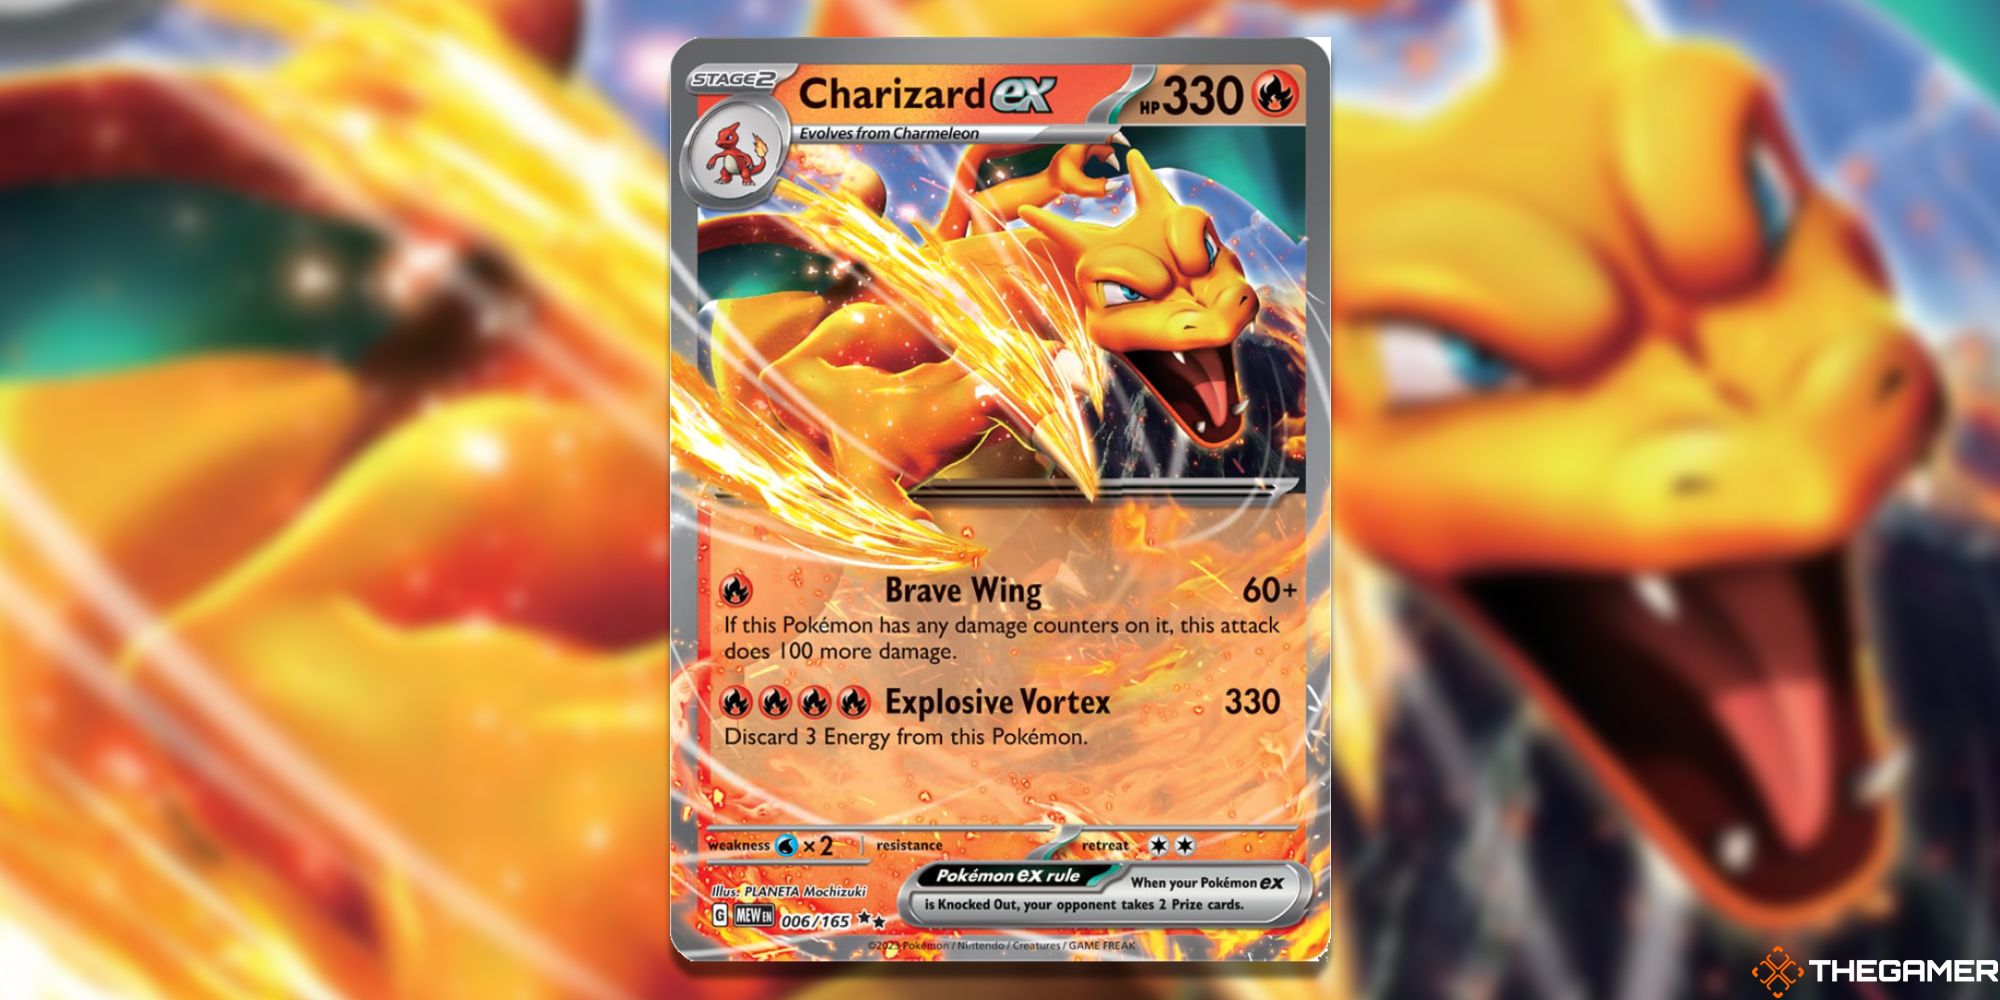 Image of the Charizard ex card in Magic: The Gathering, with art by PLANETA Mochizuki